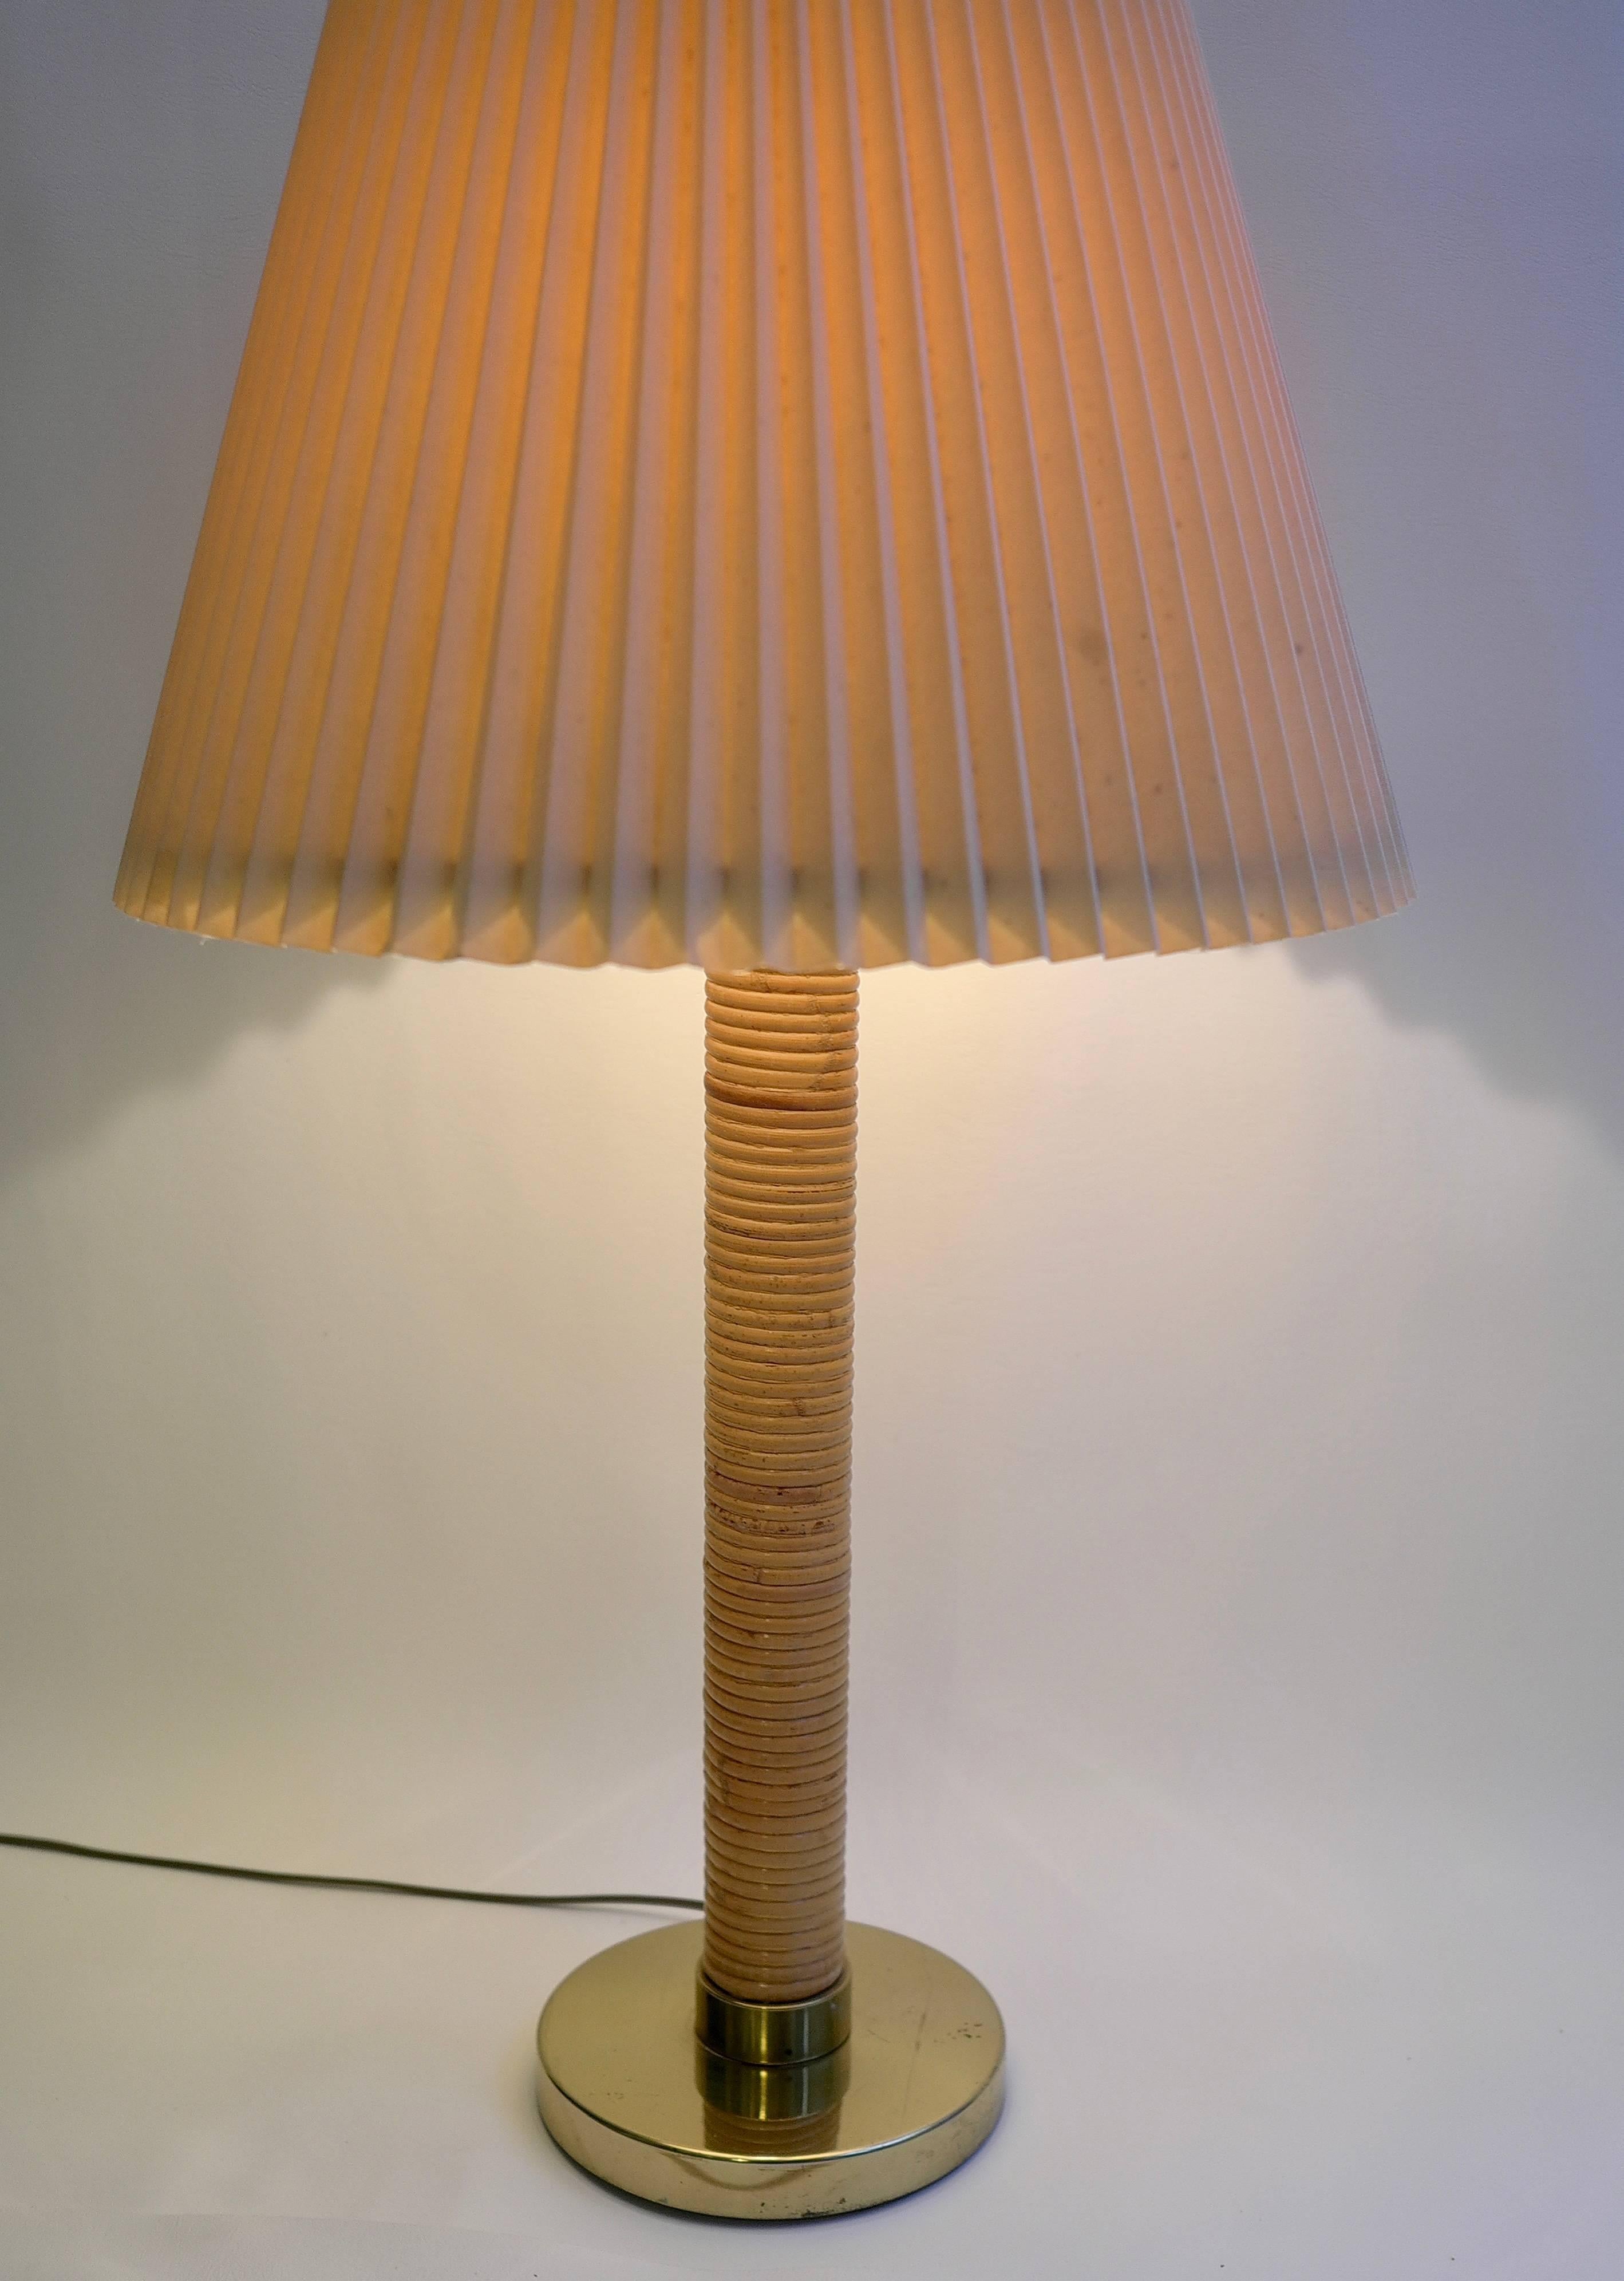 Large Austrian Bamboo and Brass Table Lamp For Sale 1